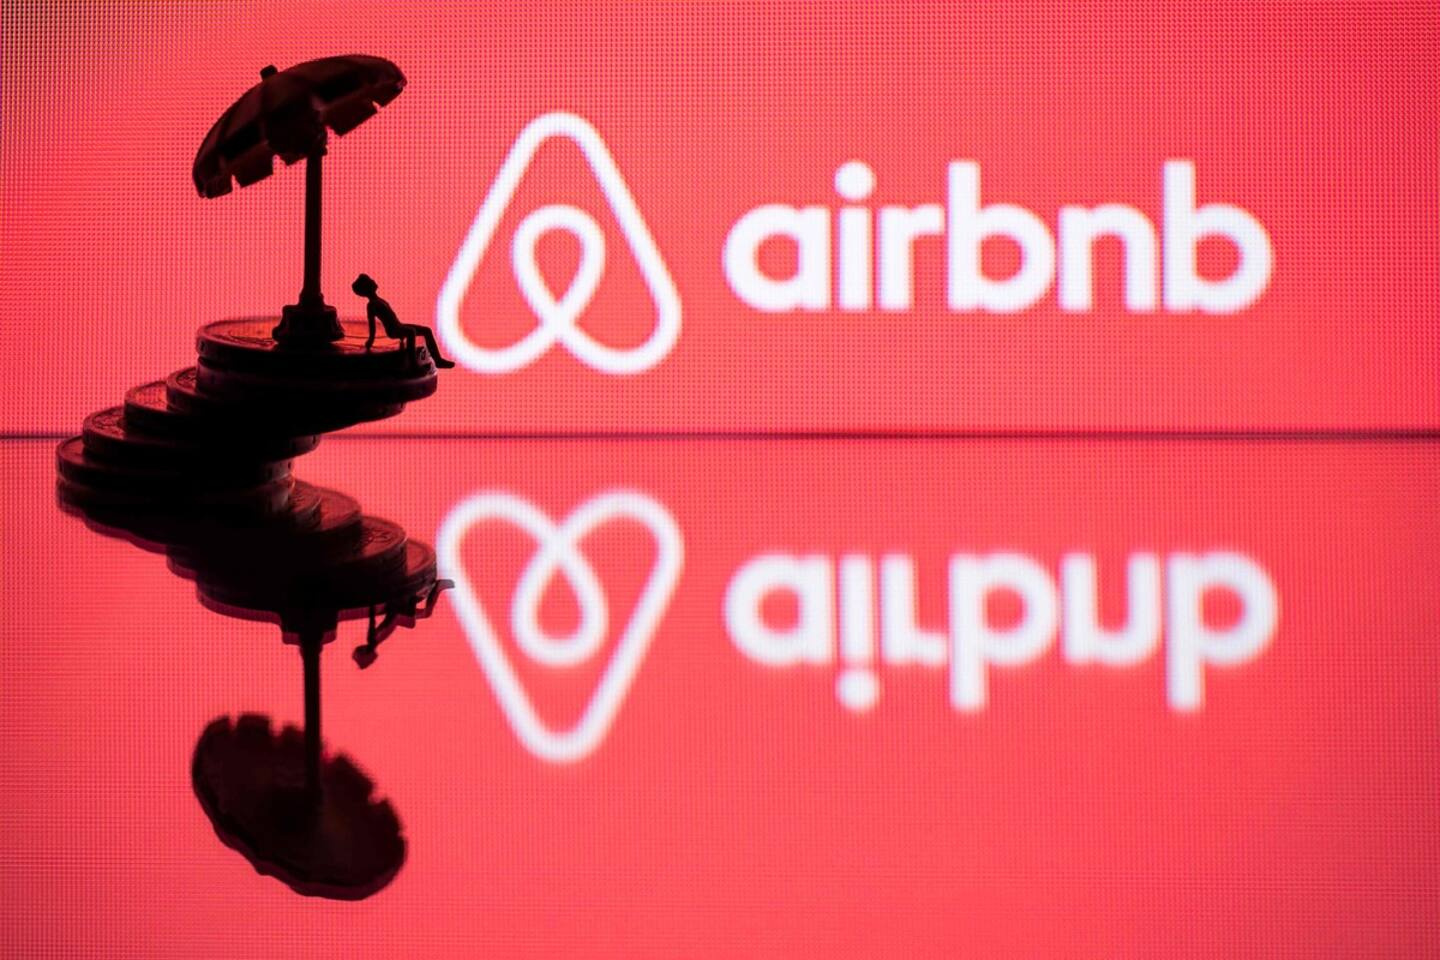 An association calls for better regulation of Airbnb accommodations